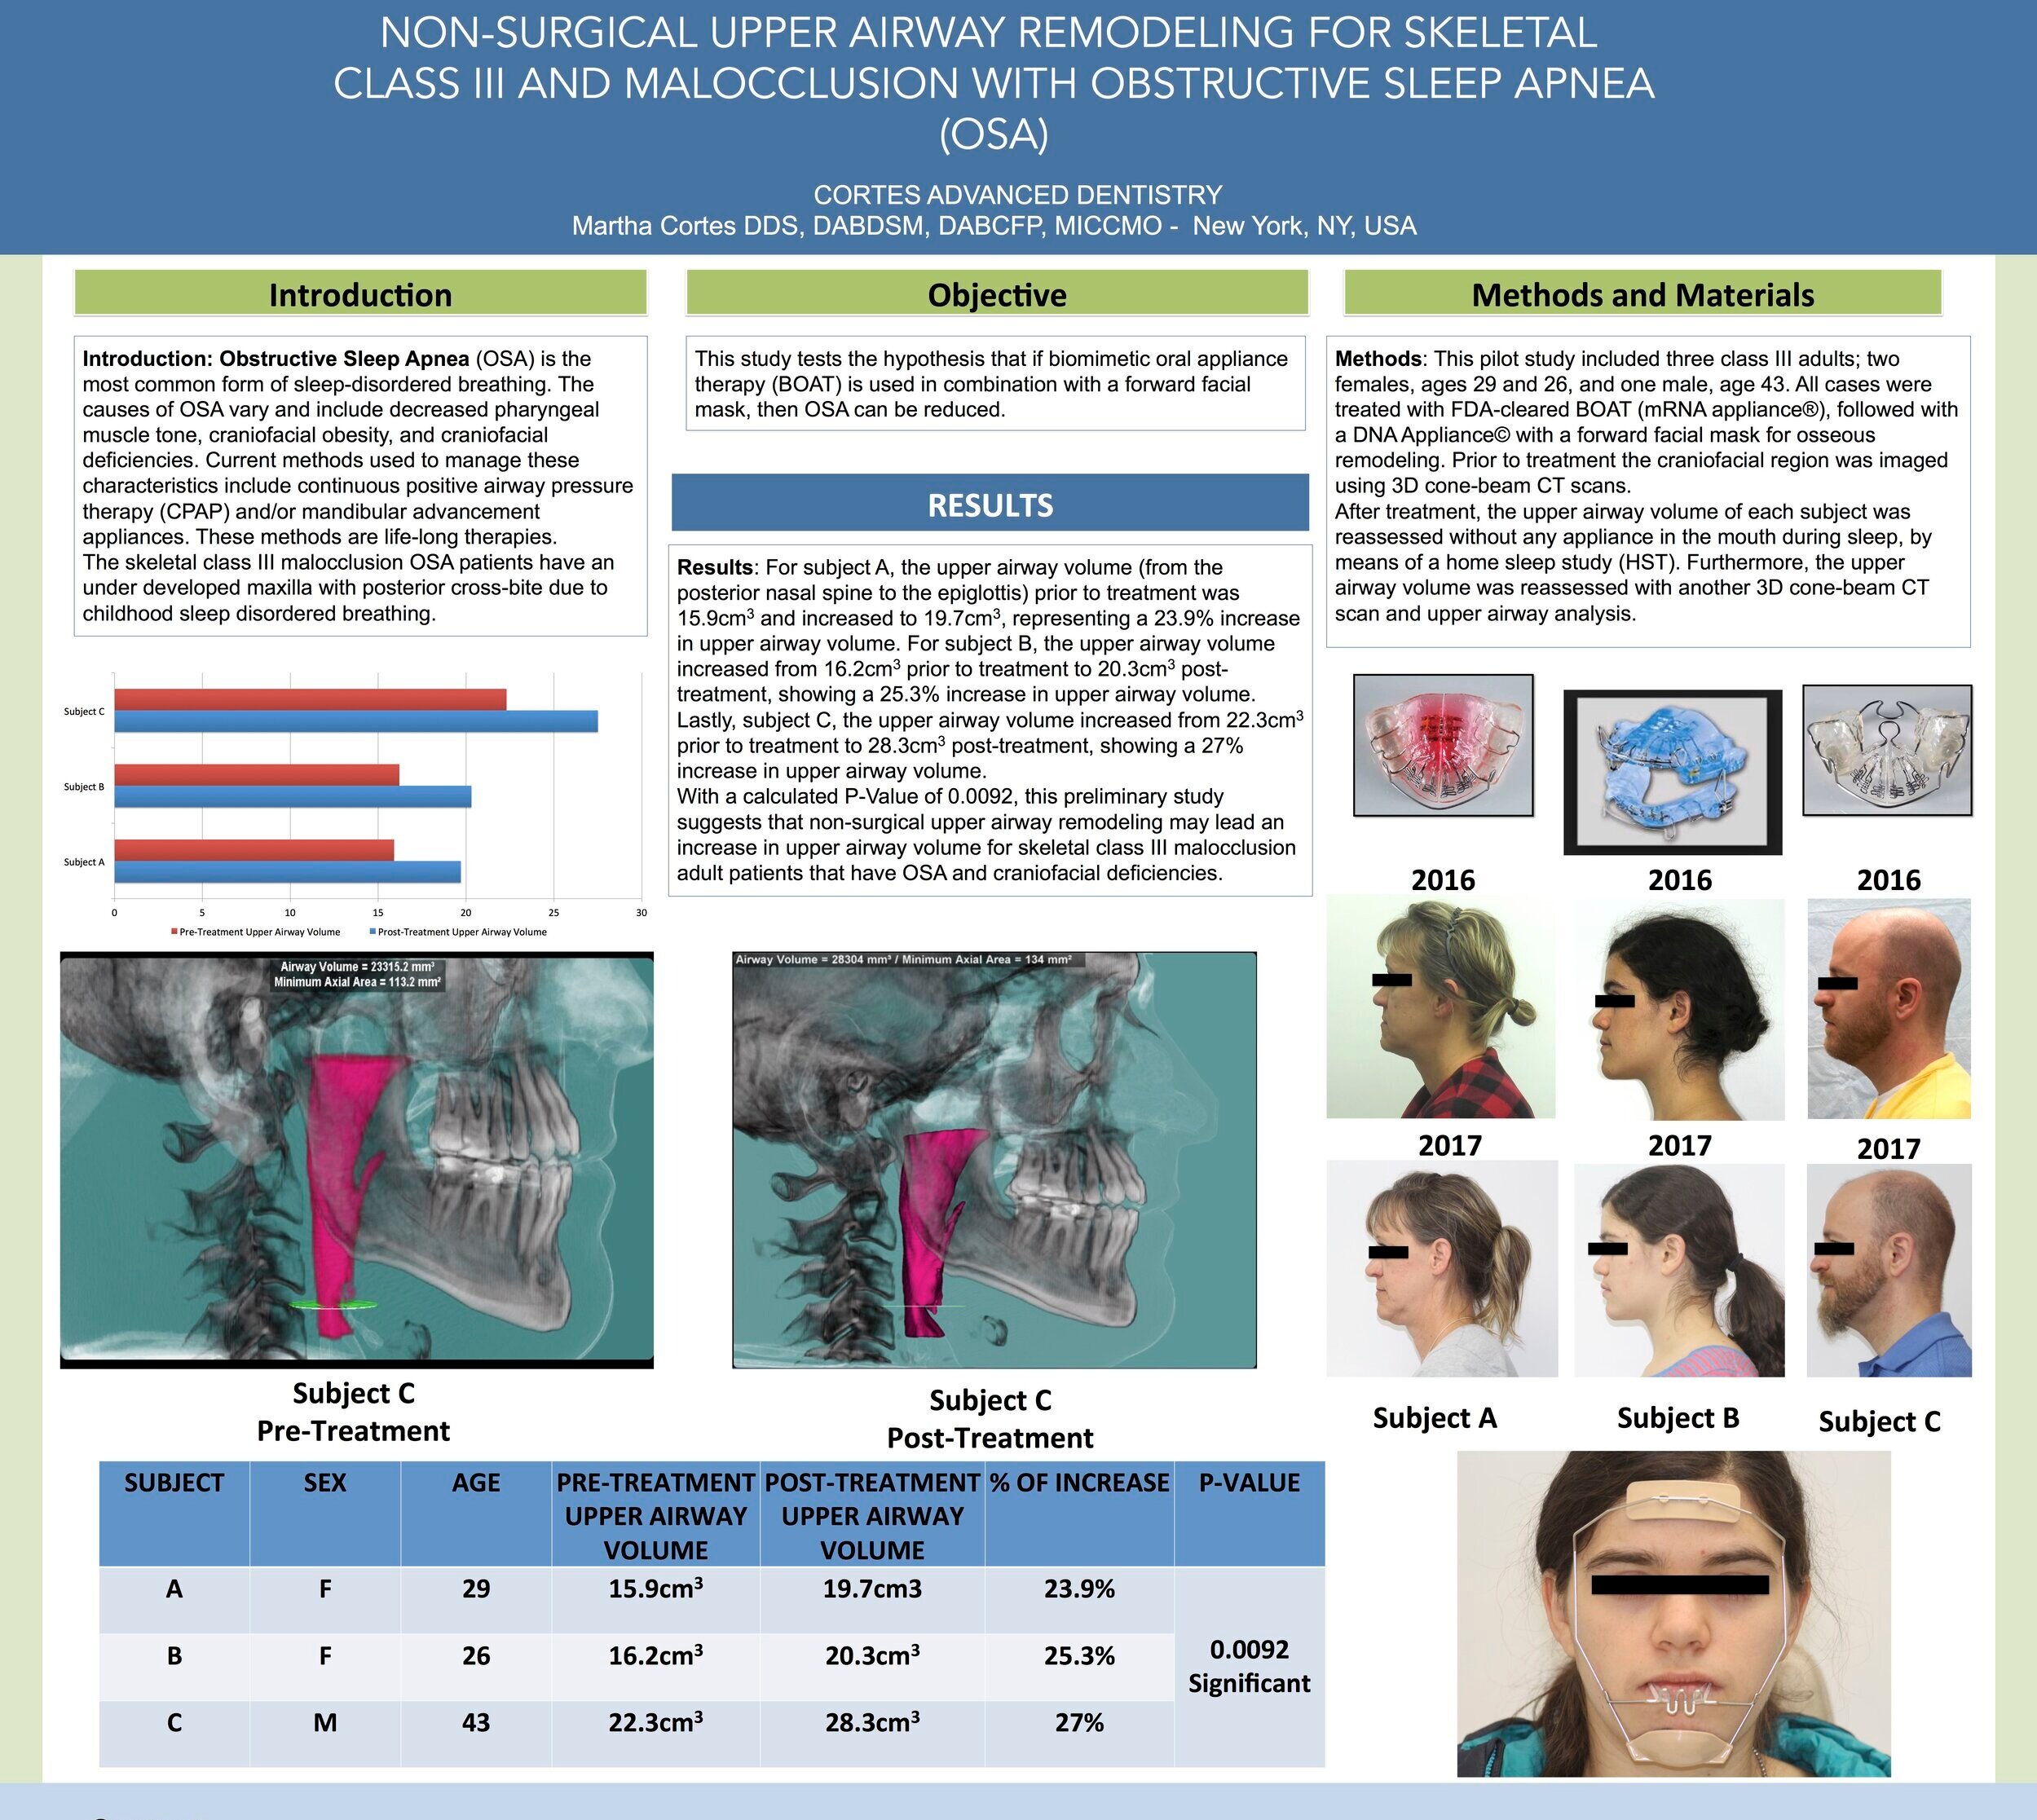  AASM Poster Presentation on Non-Surgical, Upper Airway Remodeling for Skeletal Class III Malocclusion with Obstructive Sleep Apnea 